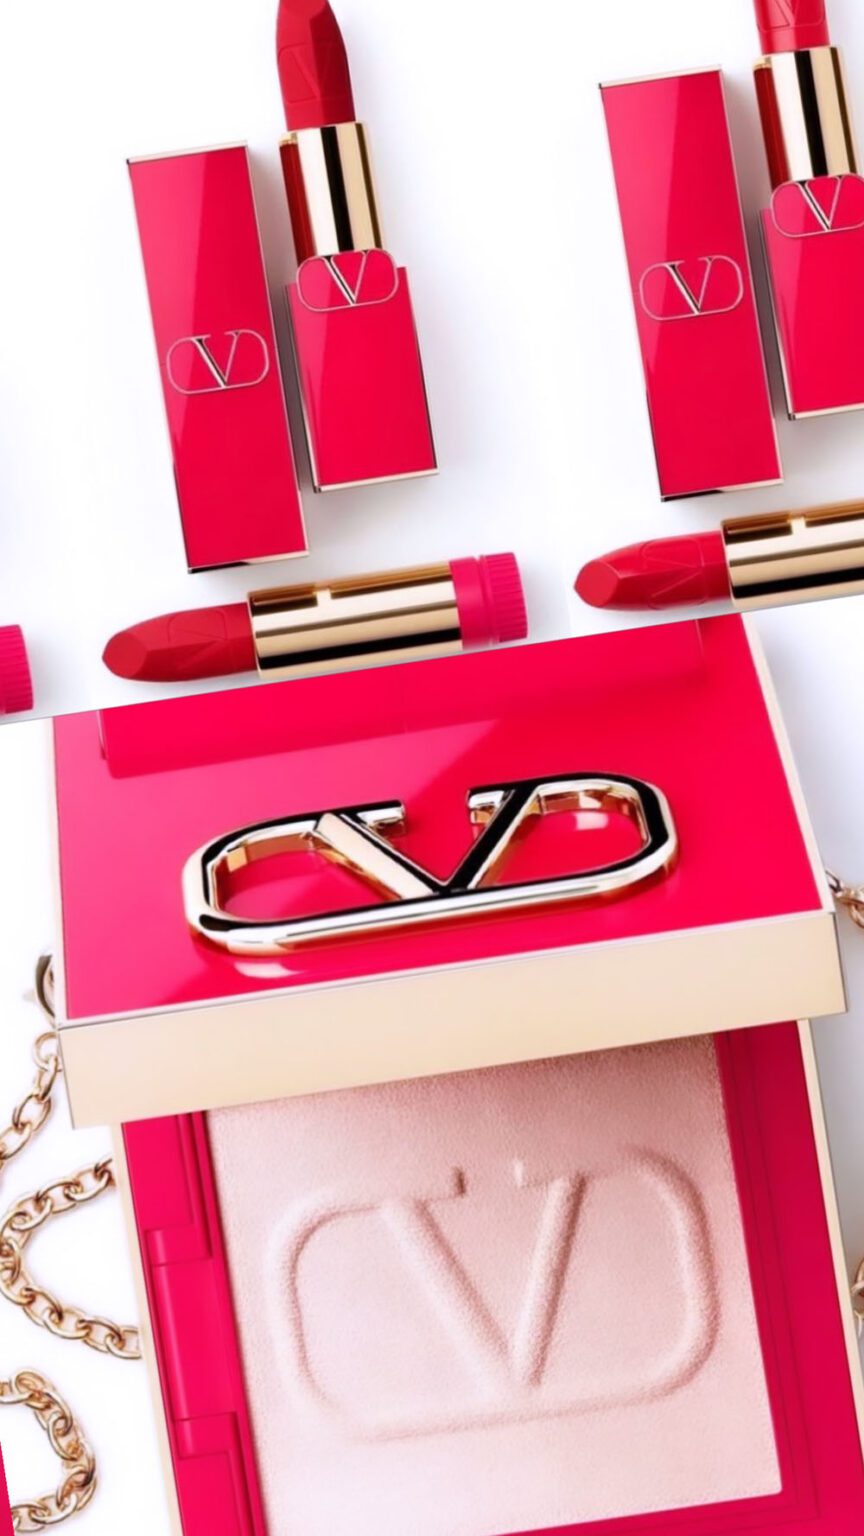 Valentino Makeup Is Scheduled To Launch In Summer 2021 I Dreaminlace 5662